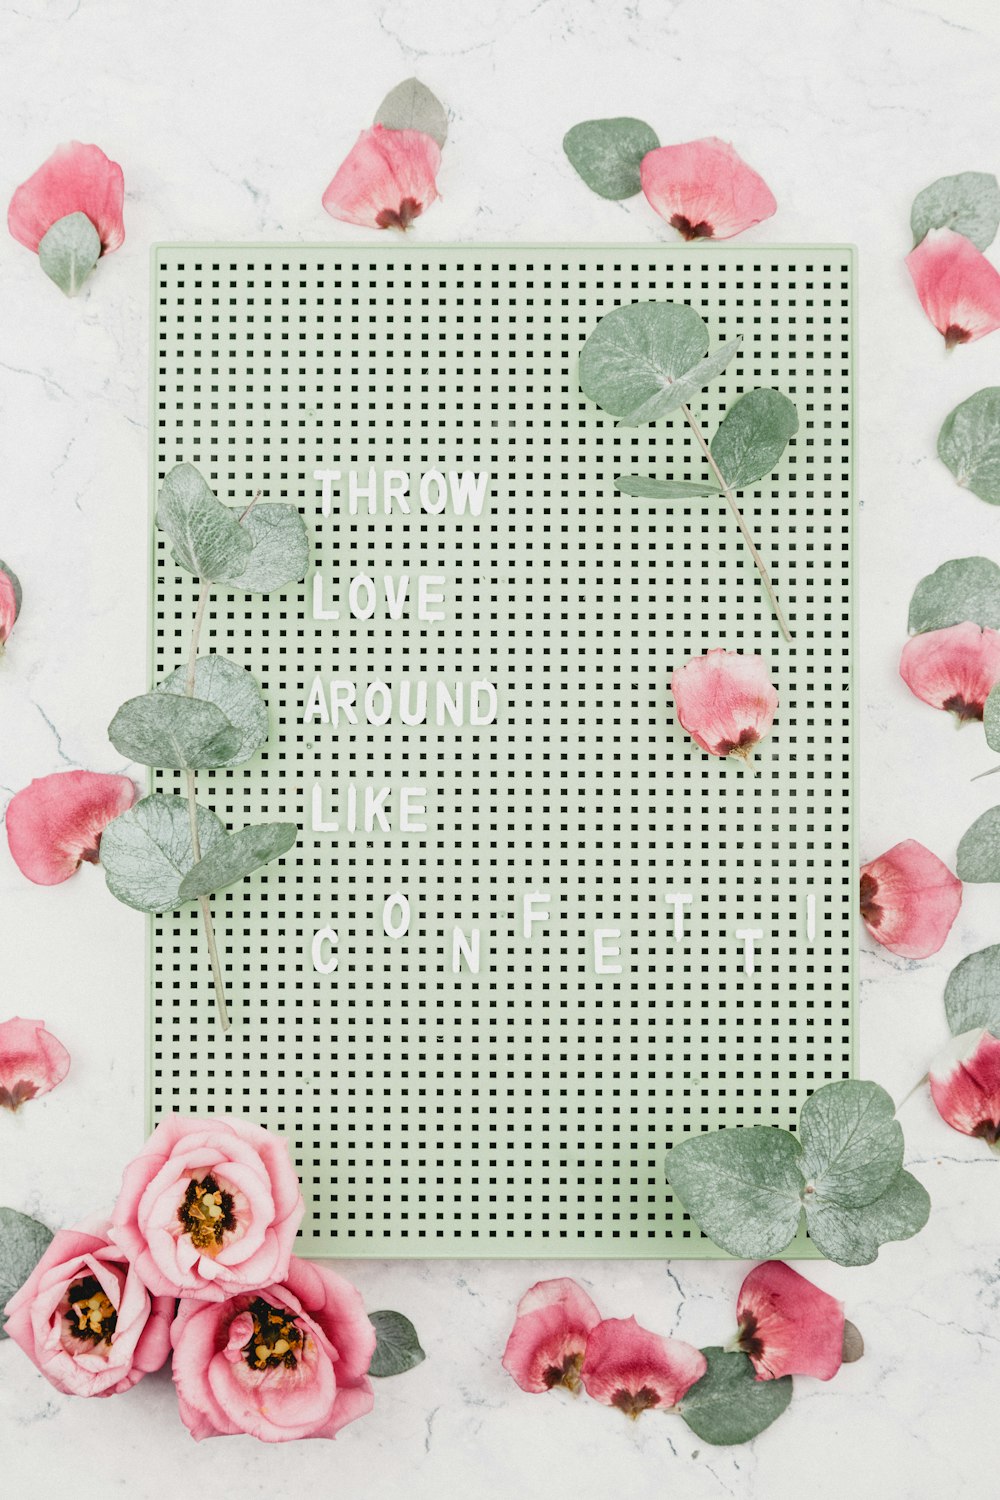 throw love around like confetti text on board surrounded b y flowers